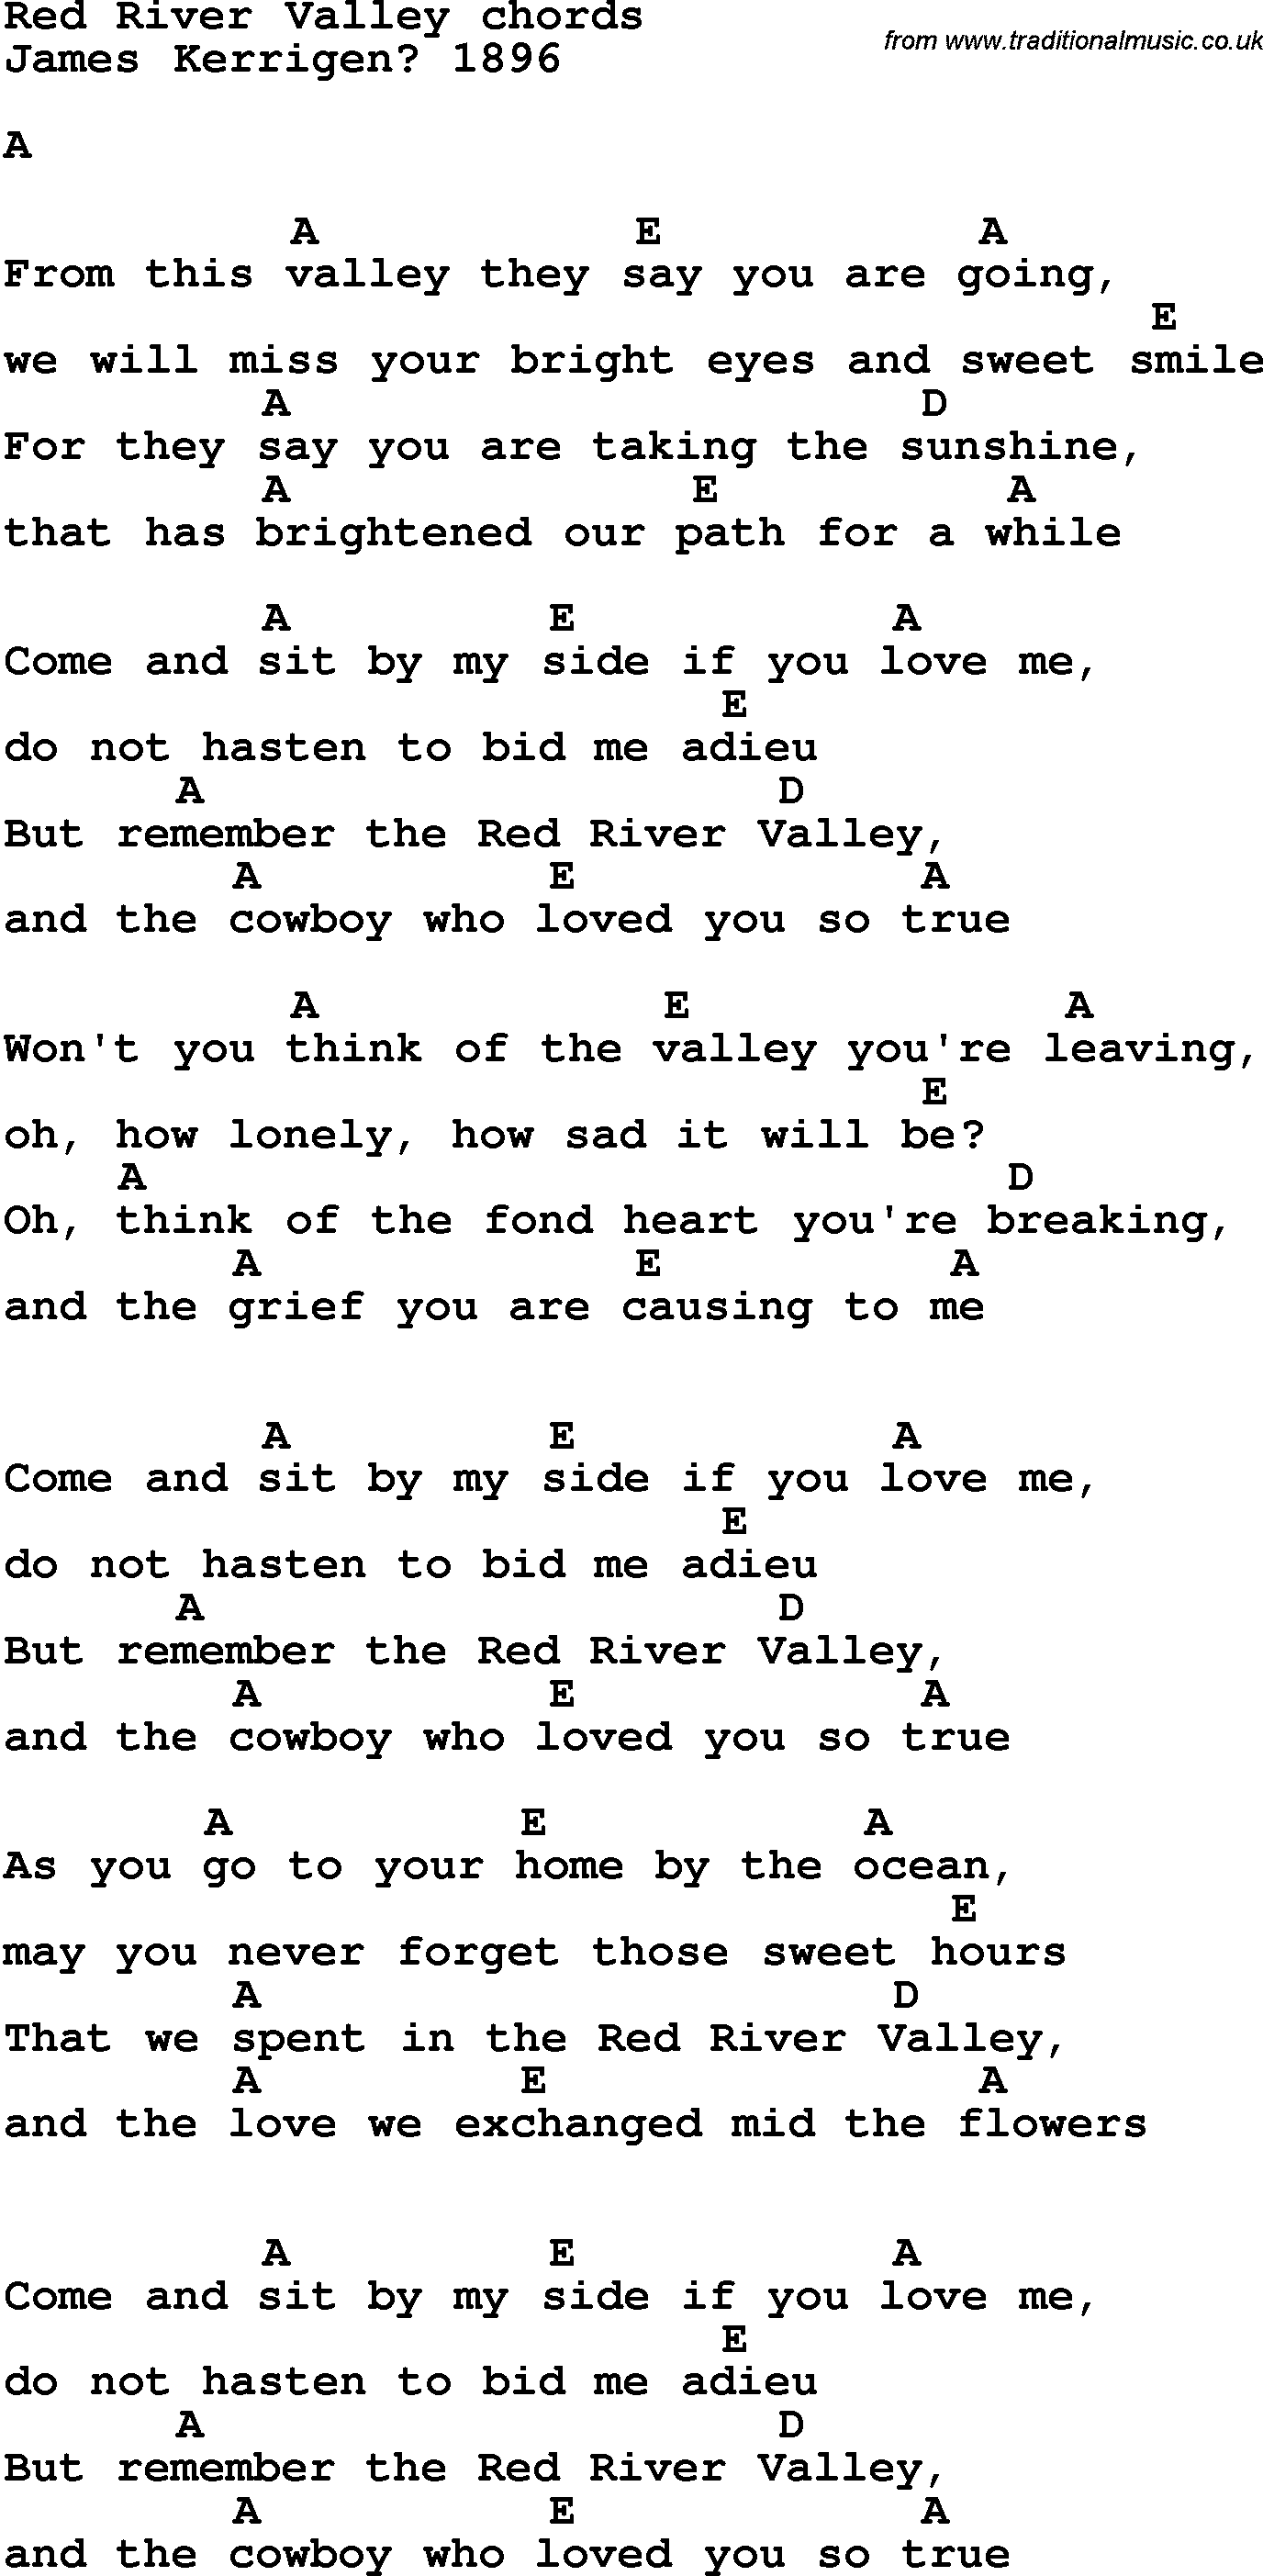 Song Lyrics with guitar chords for Red River Valley